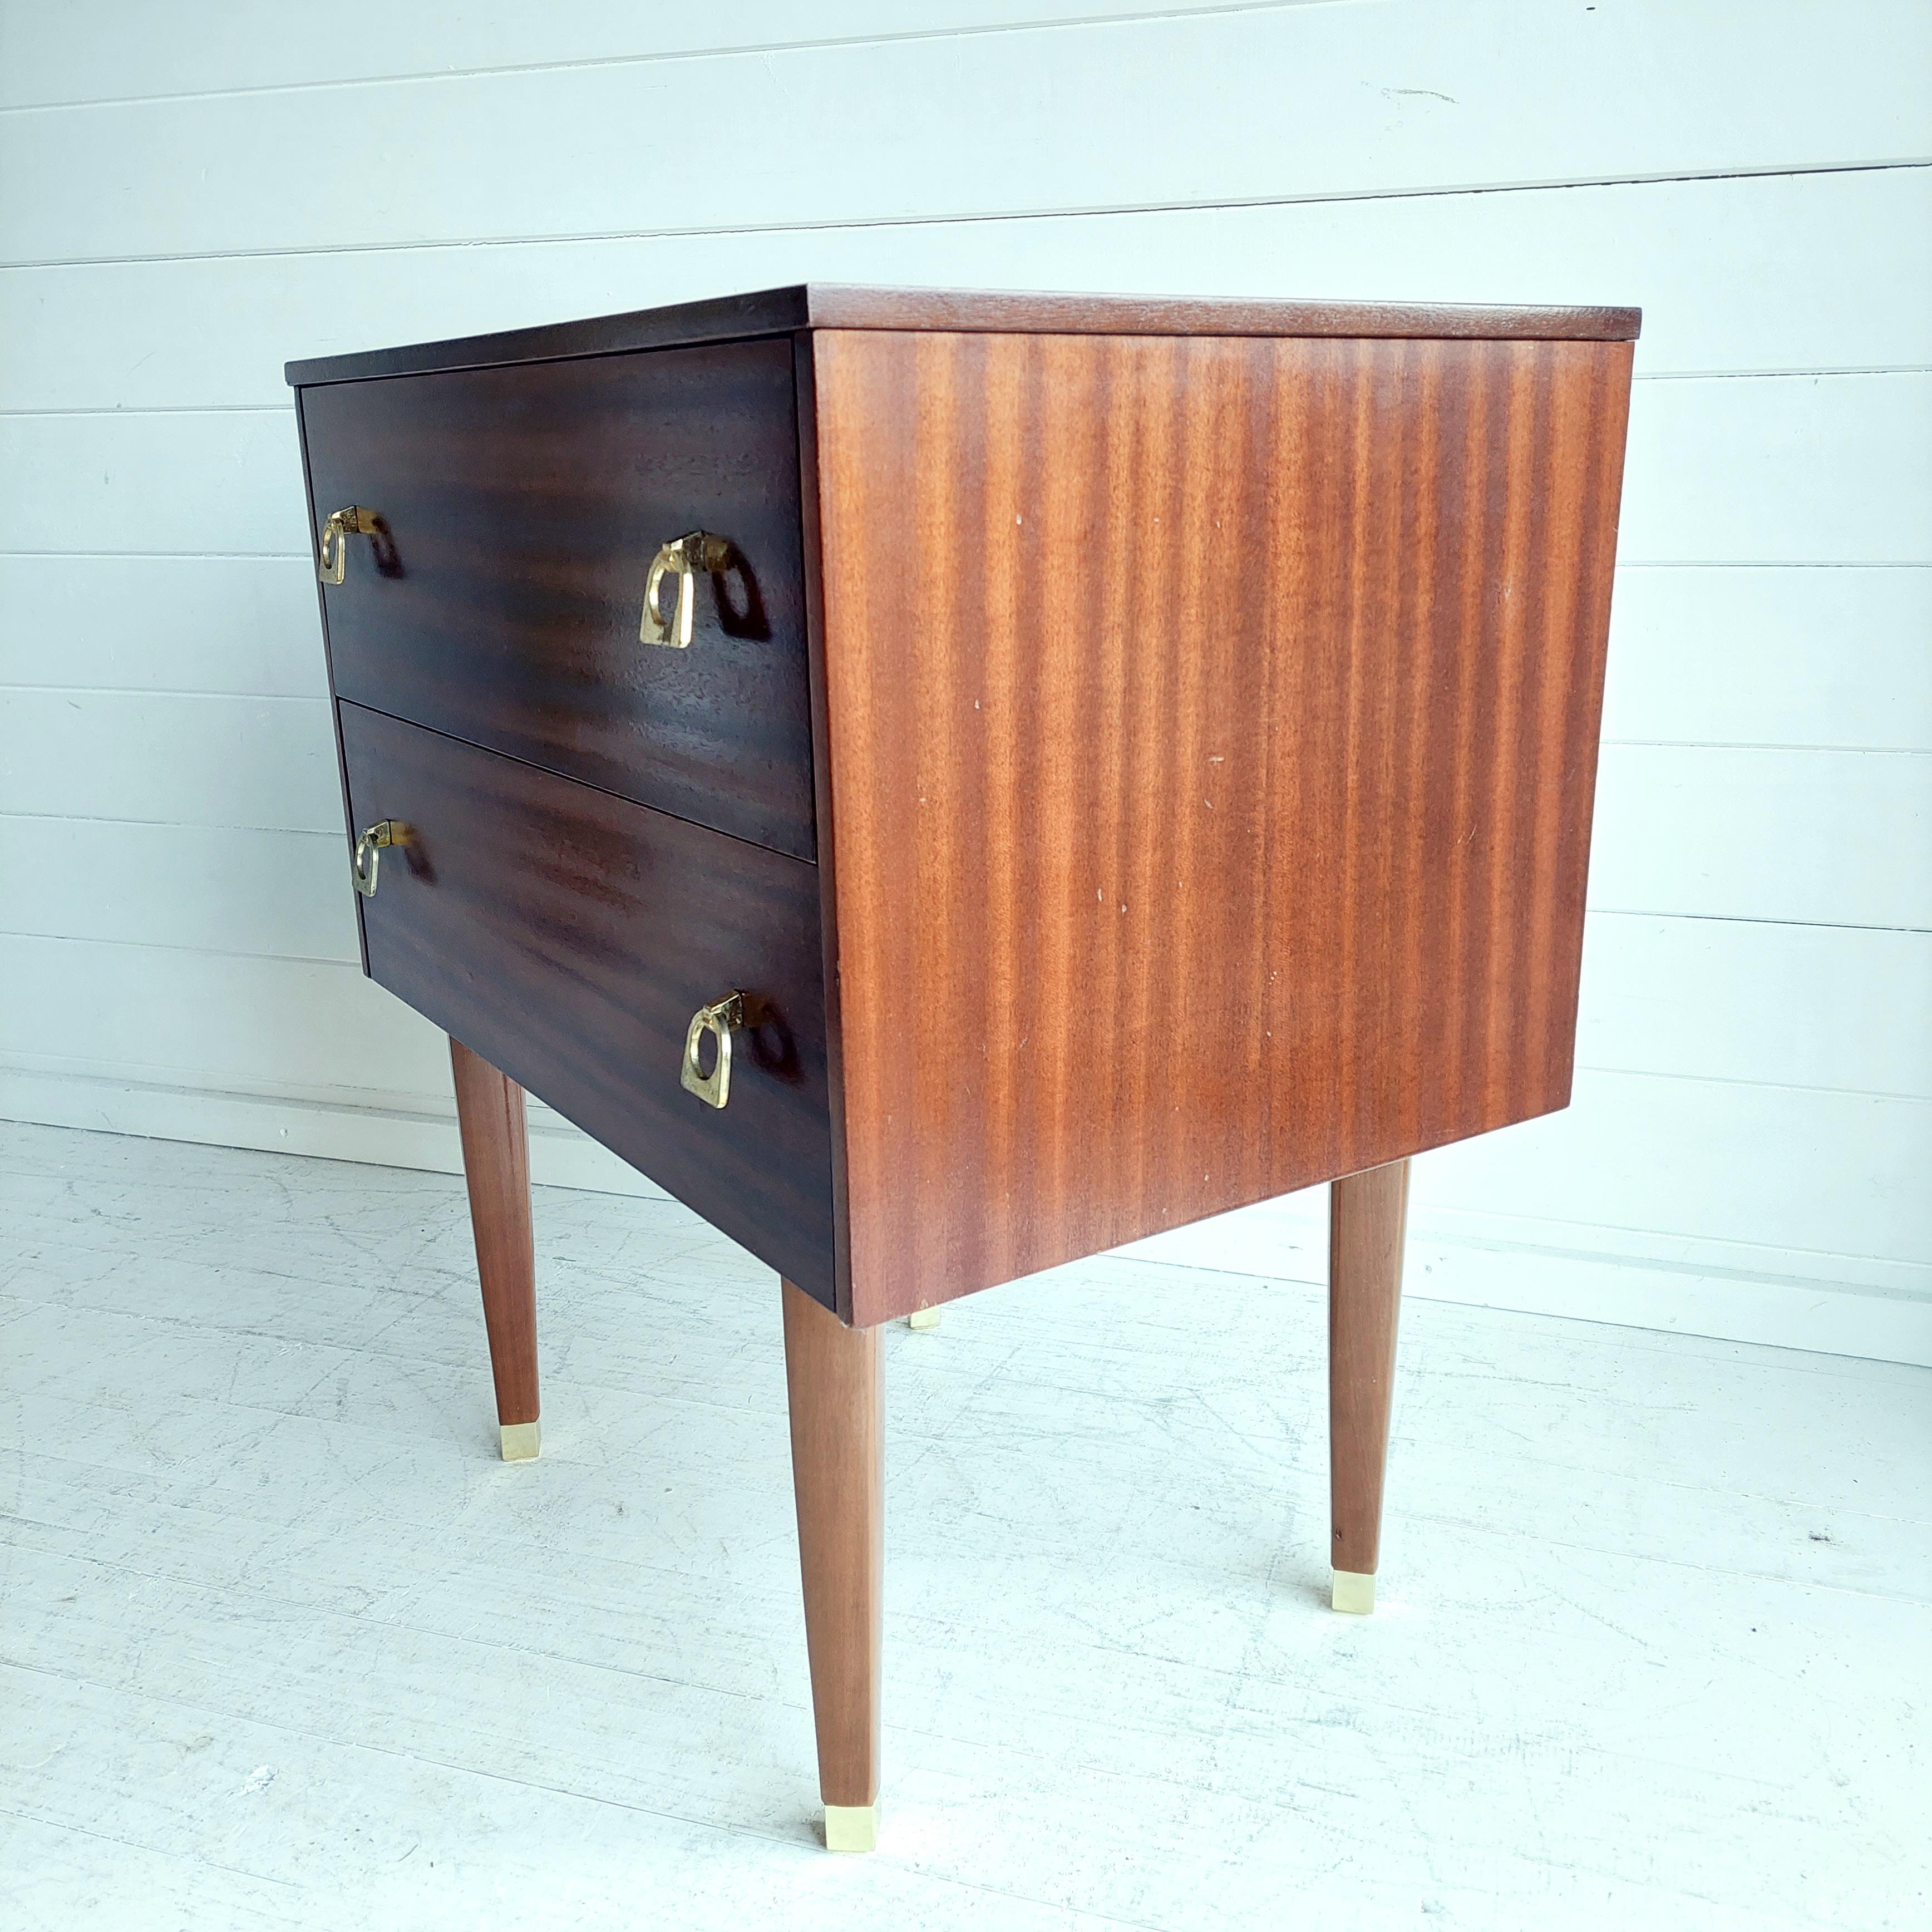 60s bedside table